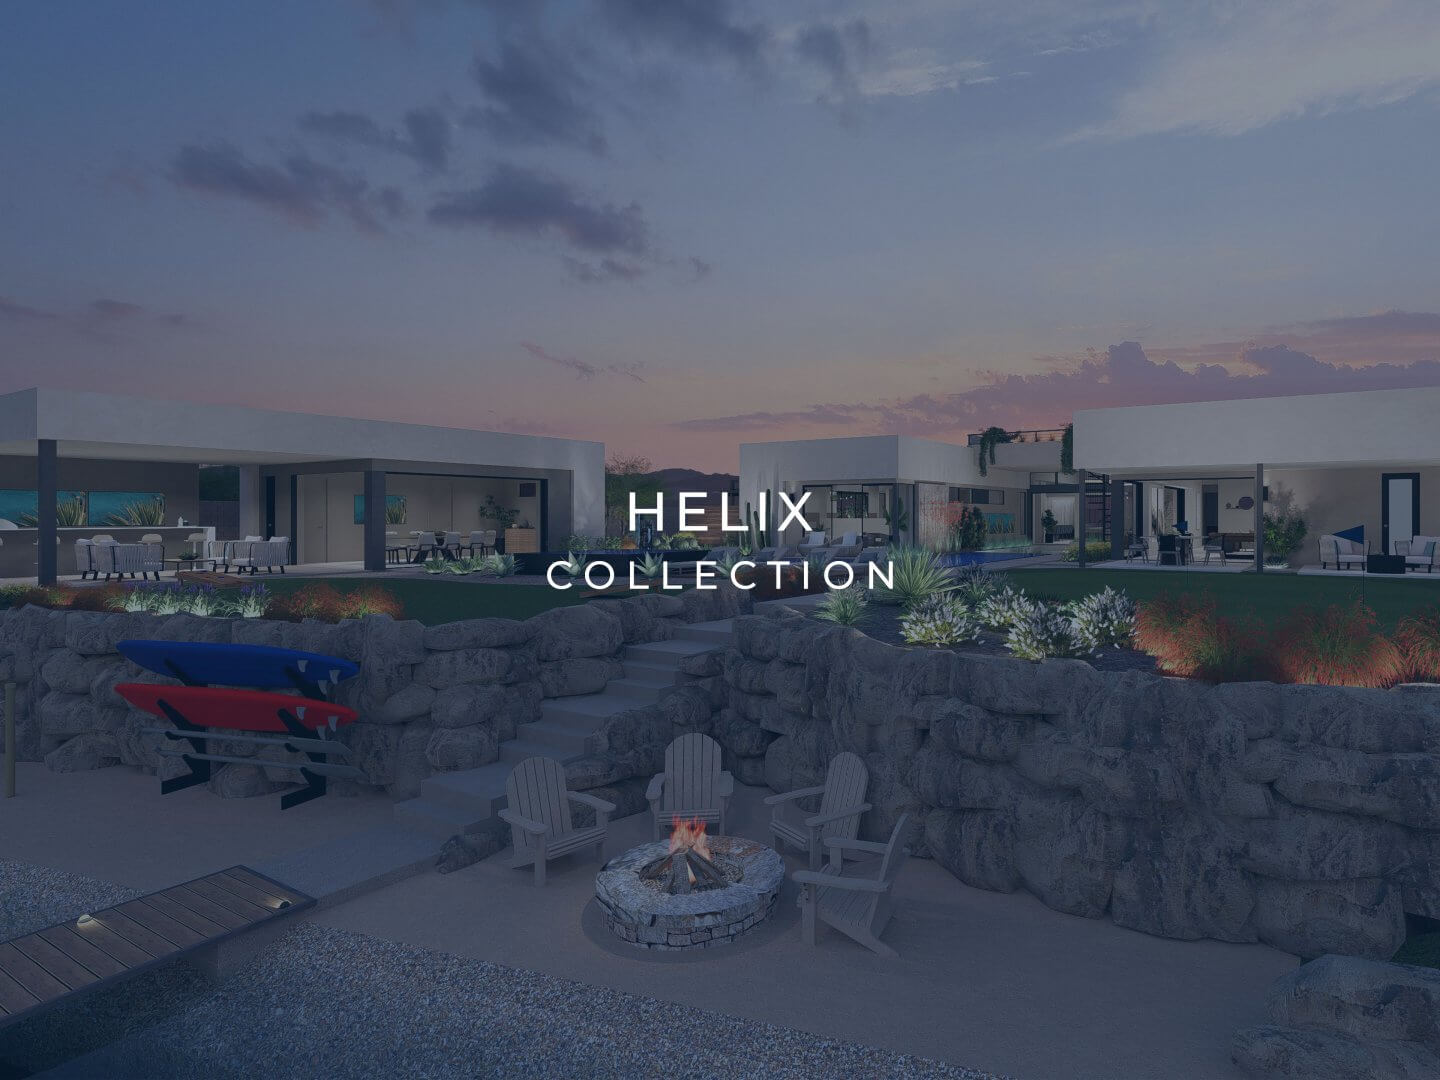 The Helix Collection